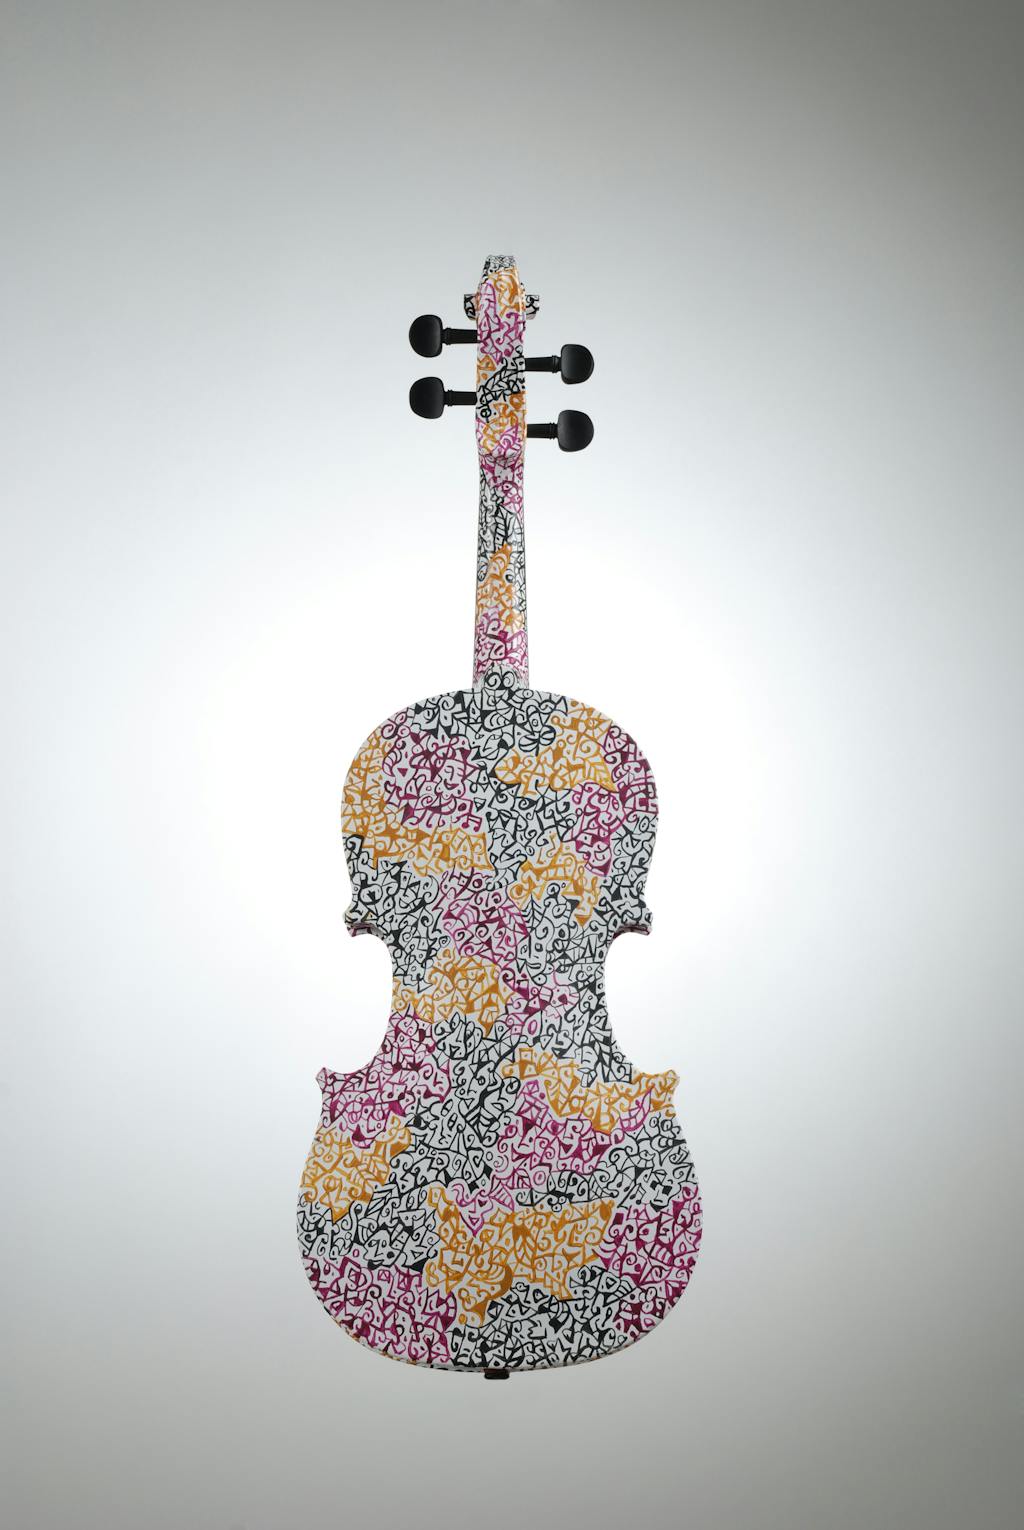 Violin "Autumn", painted by Elena Birkenwald in 2006